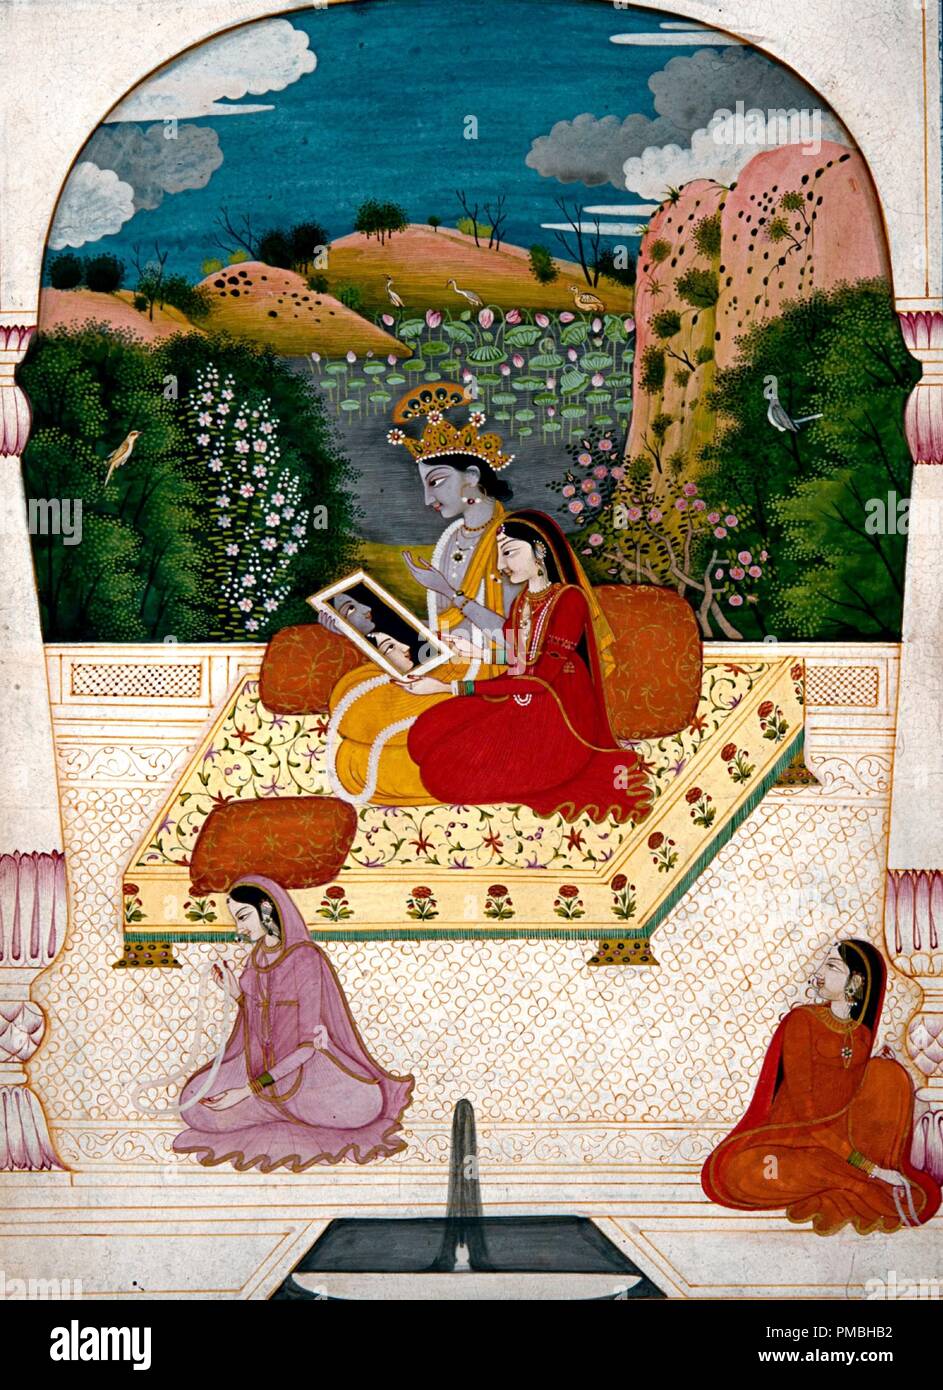 Krishna and Radha looking into a mirror. Date/Period: 1800. Painting. Height: 310 mm (12.20 in); Width: 220 mm (8.66 in). Author: UNKNOWN. Stock Photo